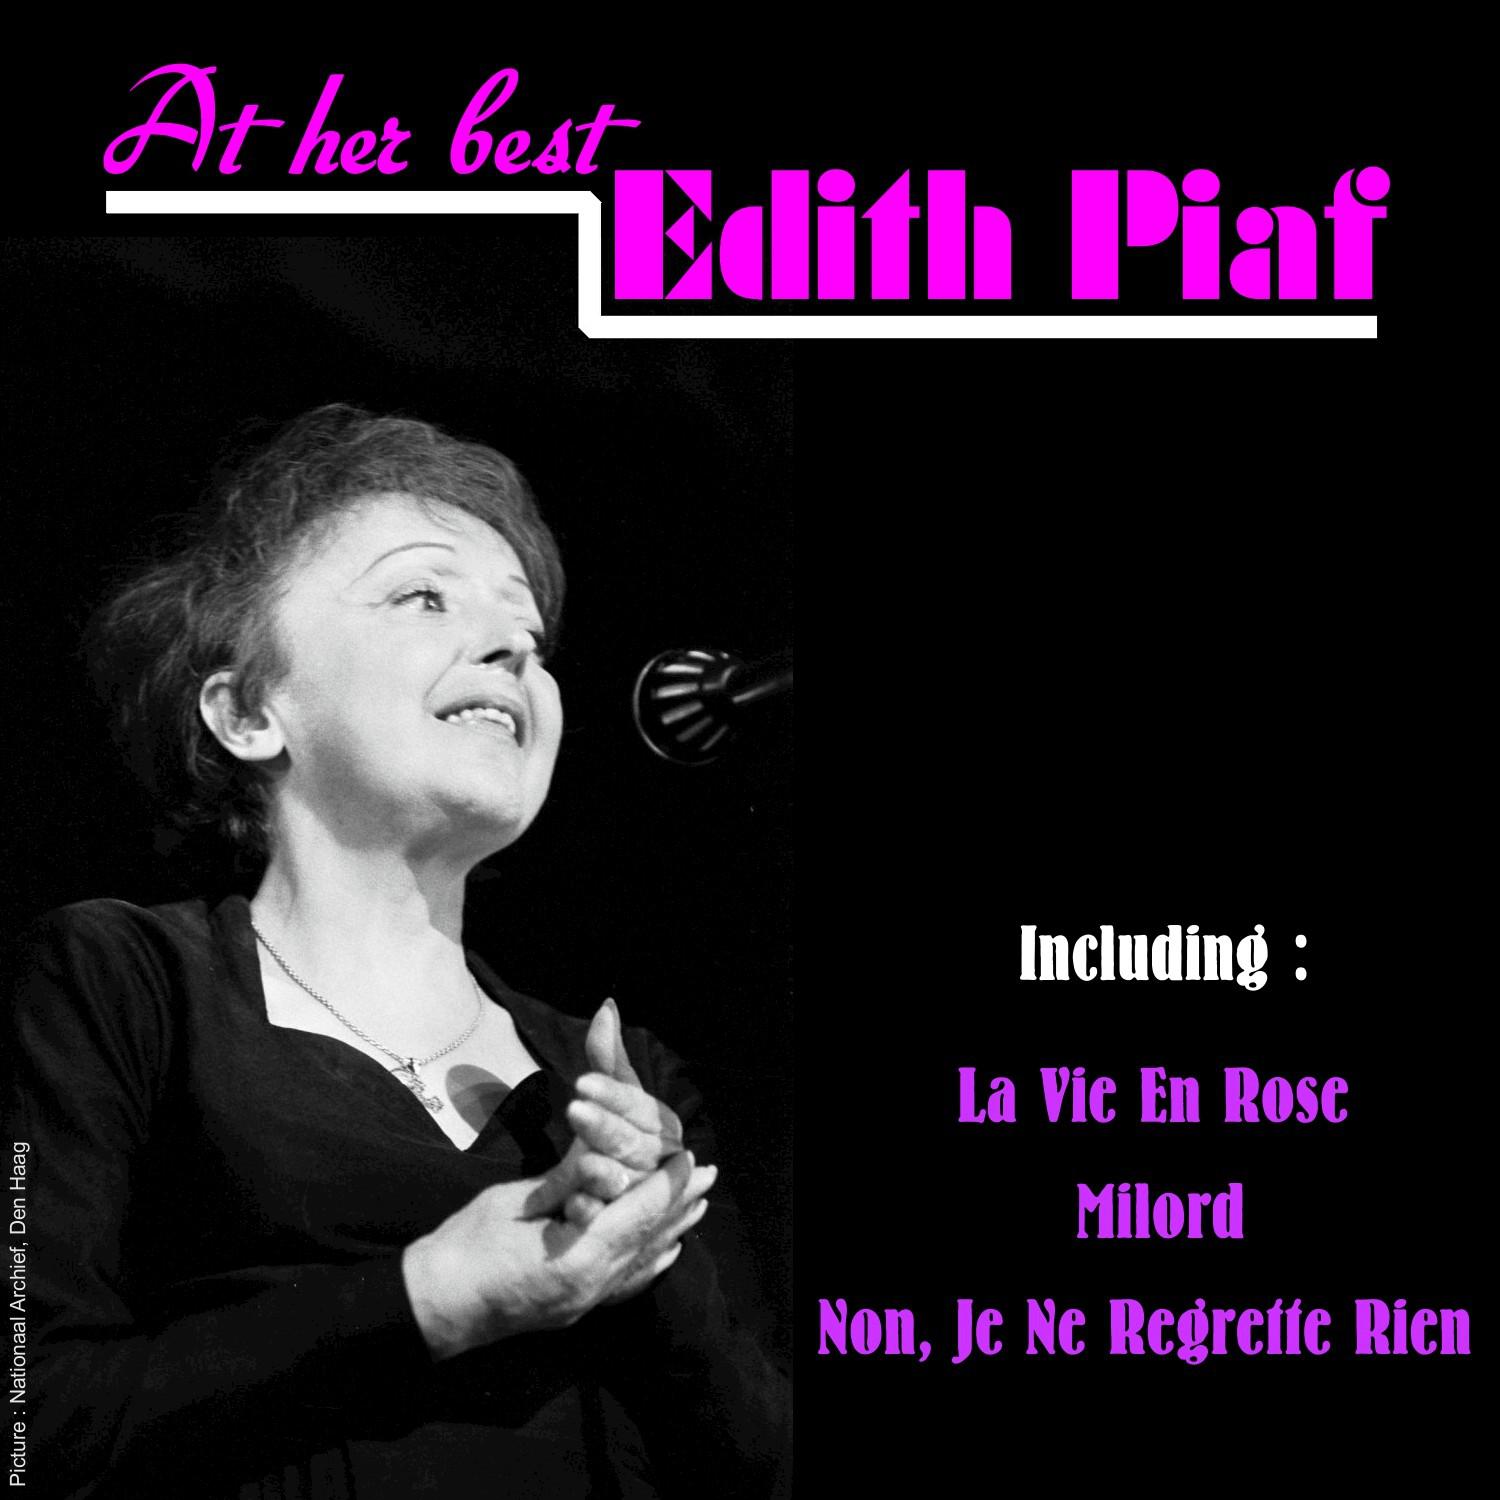 Edith Piaf - at Her Best